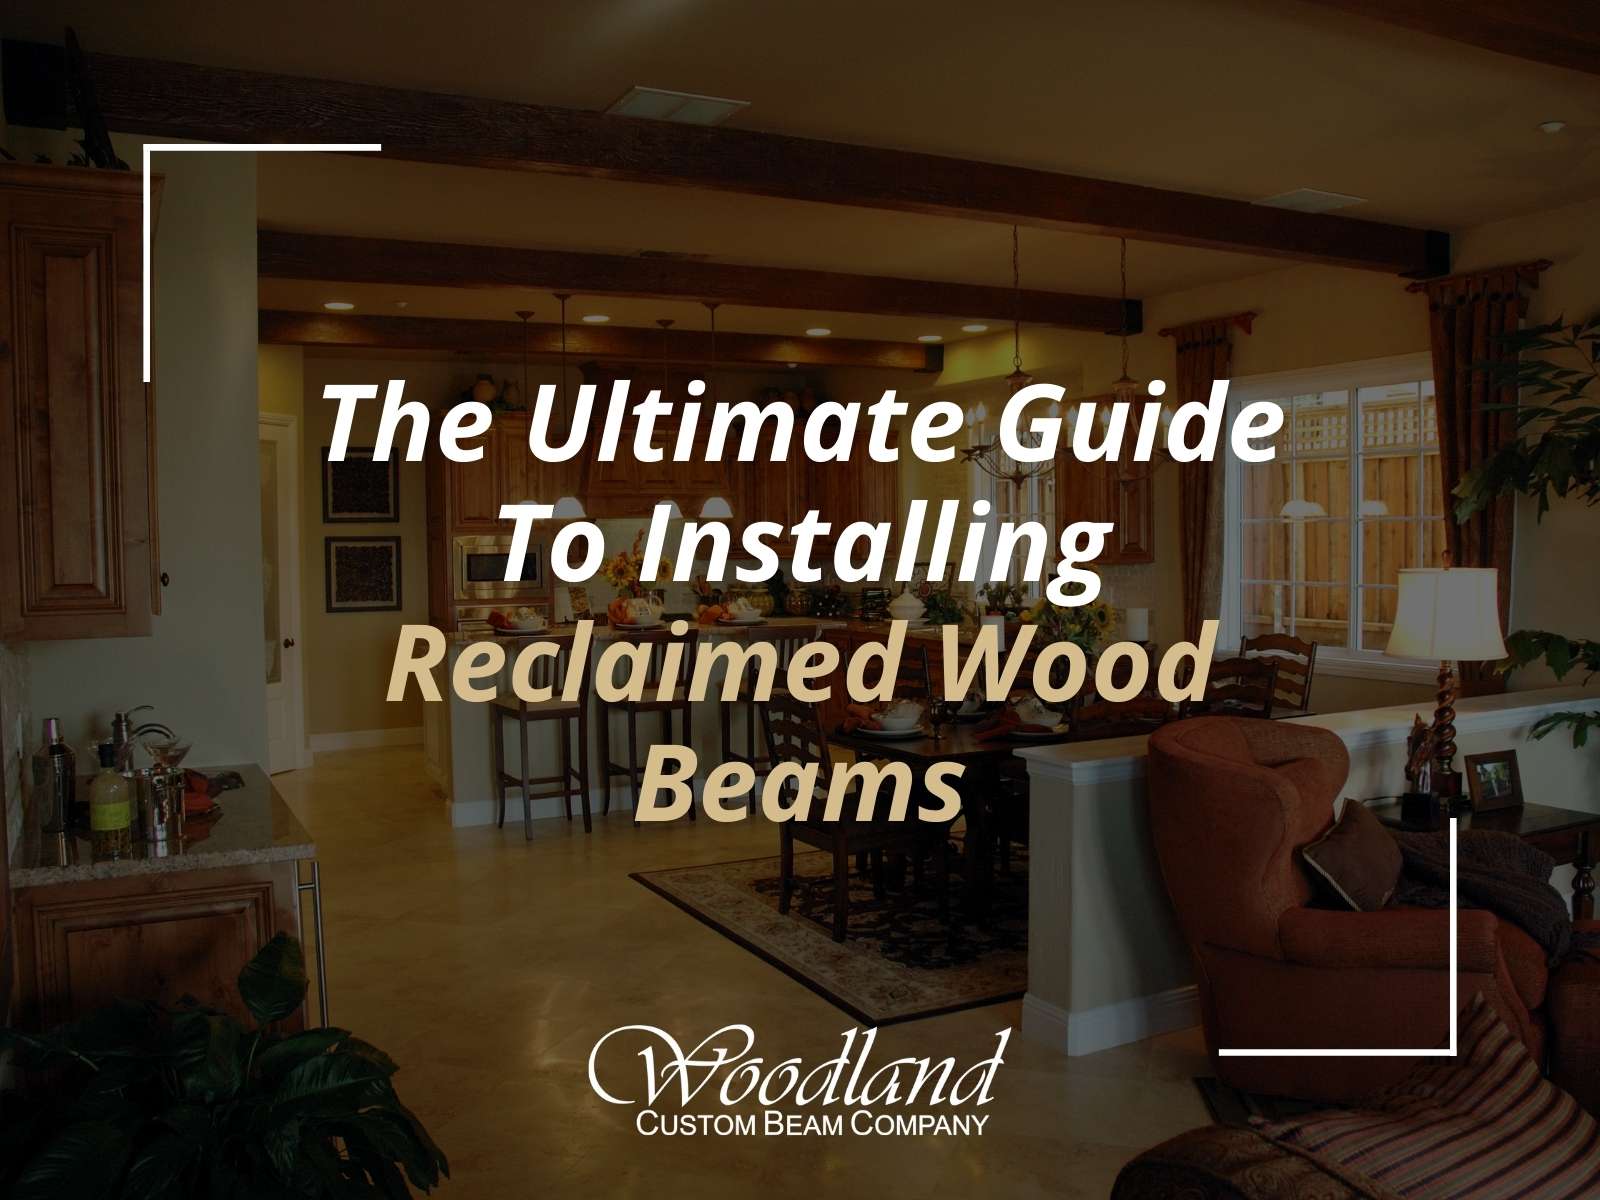 The Ultimate Guide To Installing Reclaimed Wood Beams